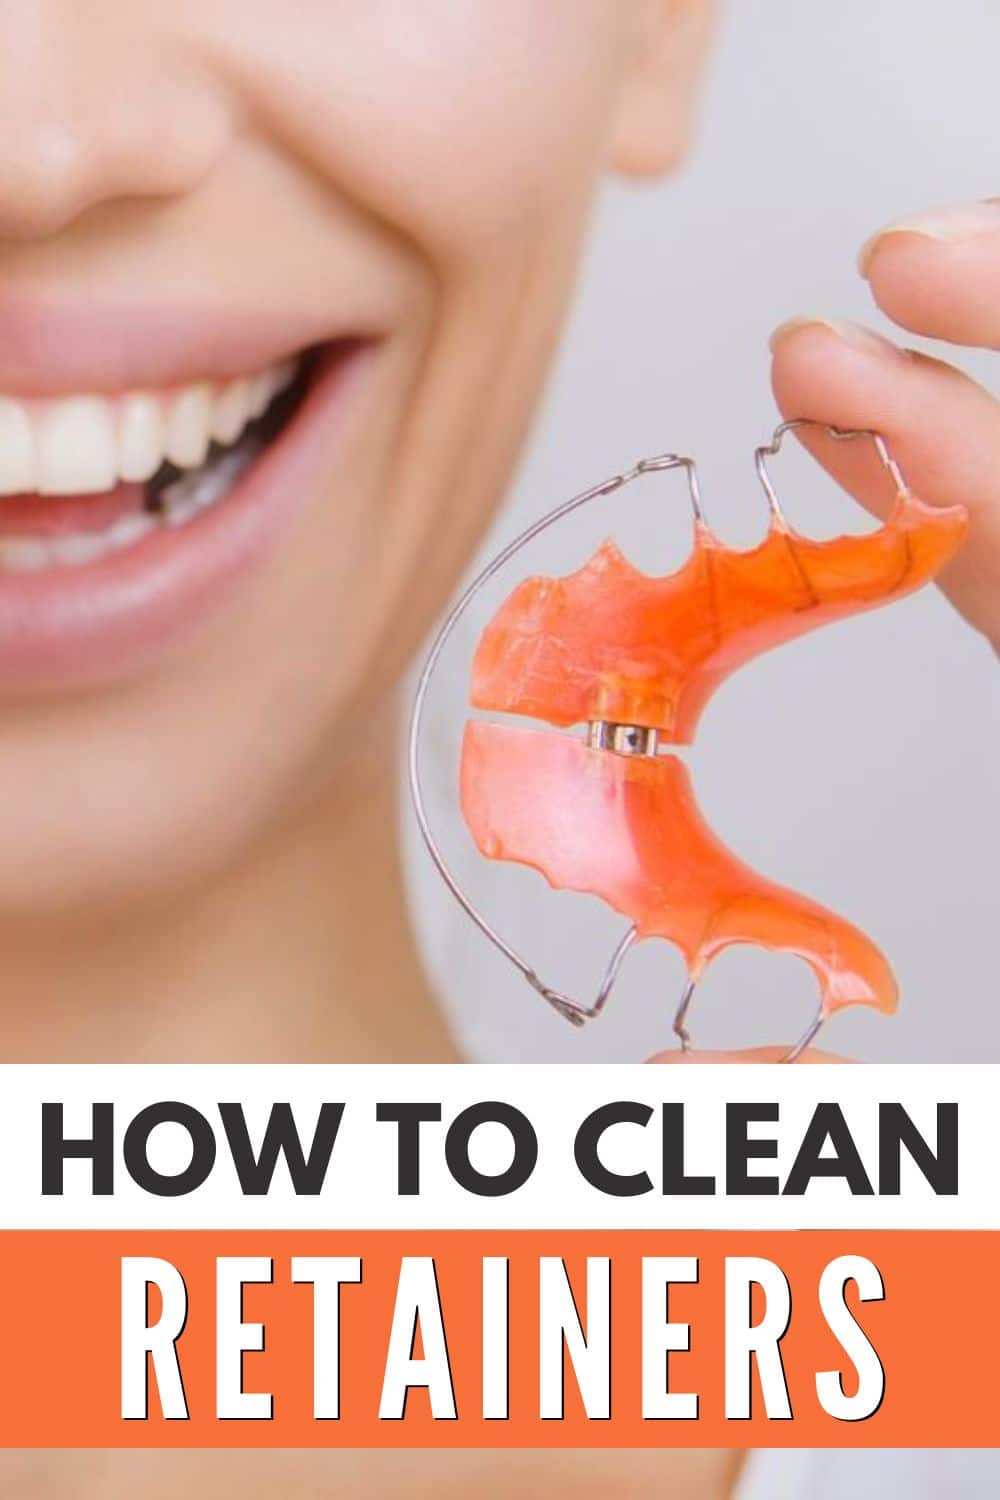 Learn the effective techniques for cleaning retainers using our step-by-step guide.